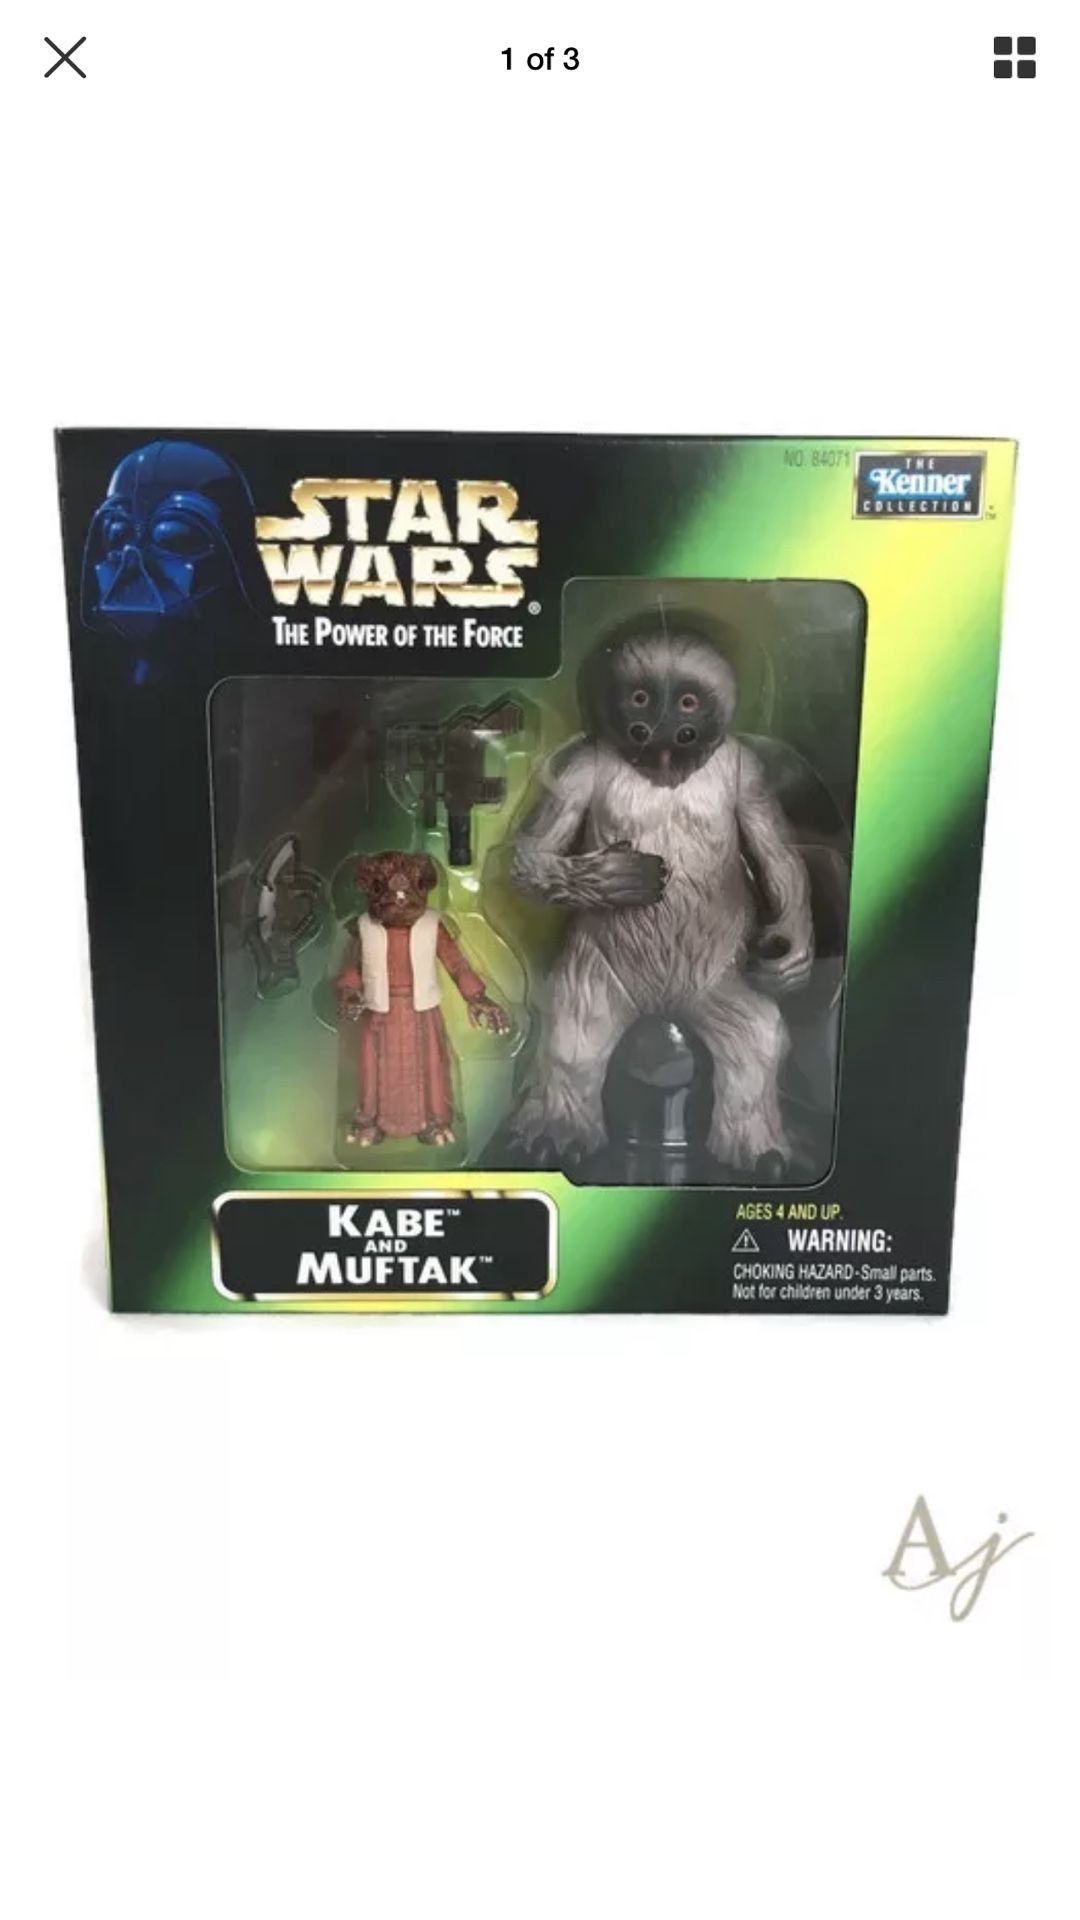 Star Wars POTF (Power of the Force) COLLECTION: Kabe & Muftak Authentically Styled Action Figure by Kenner